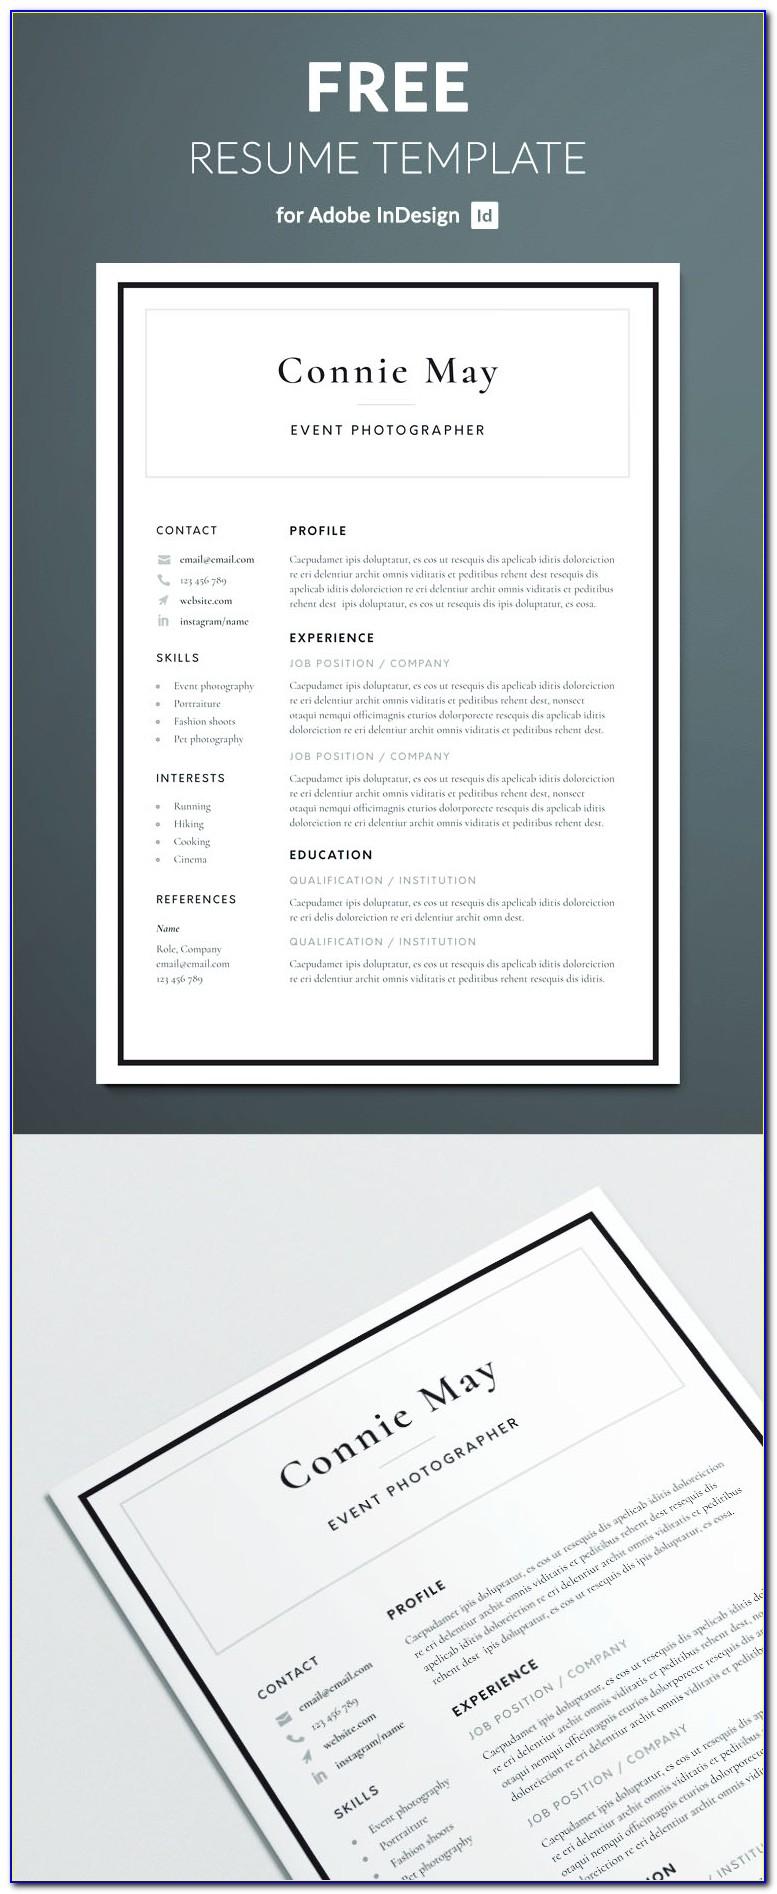 Resume Template Free Download Word 2003